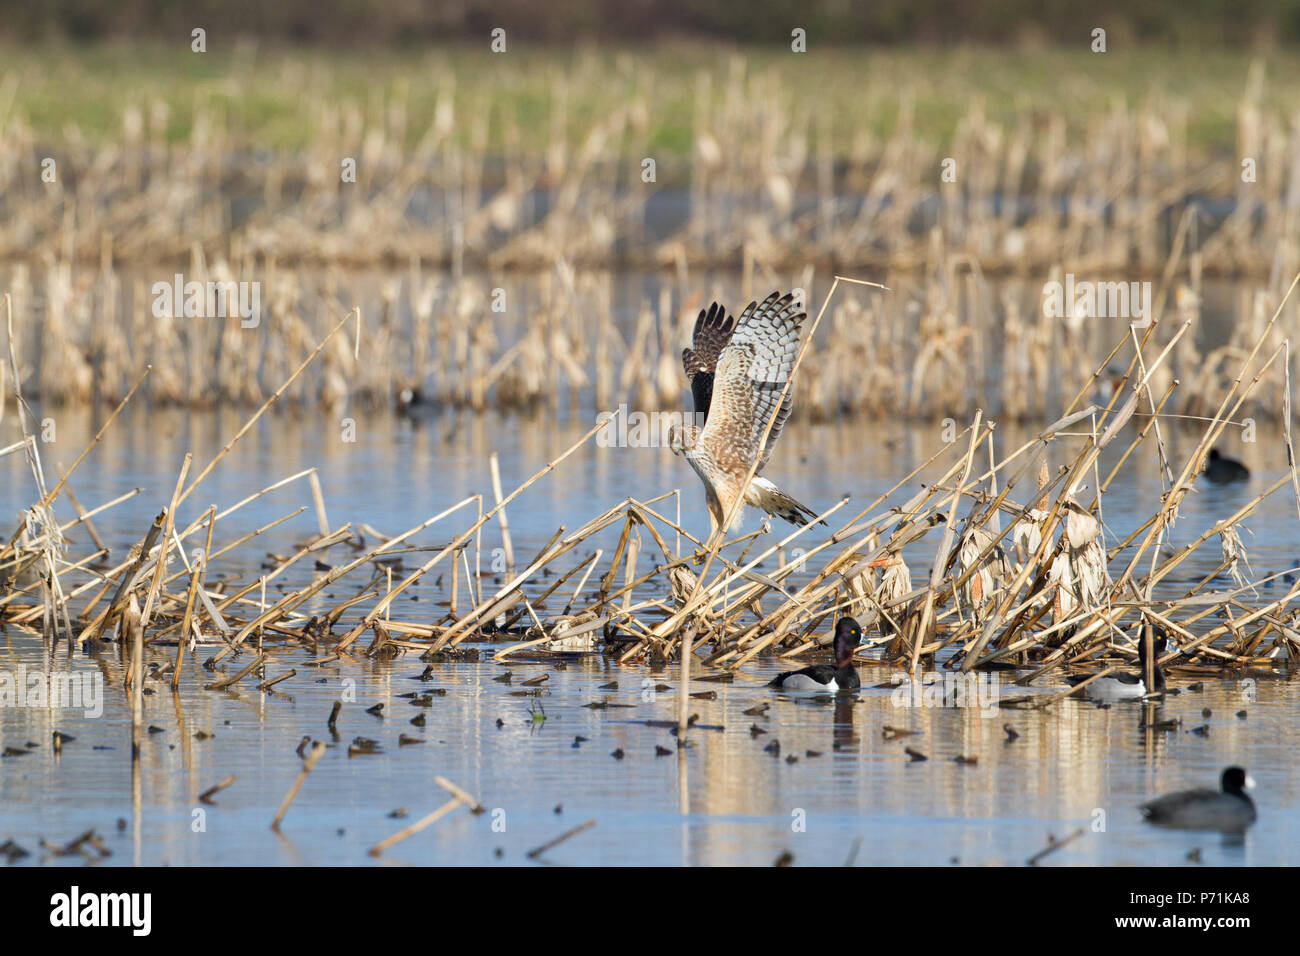 A northern harrier landing on flooded corn stubble among ring-necked ducks and coots. Stock Photo